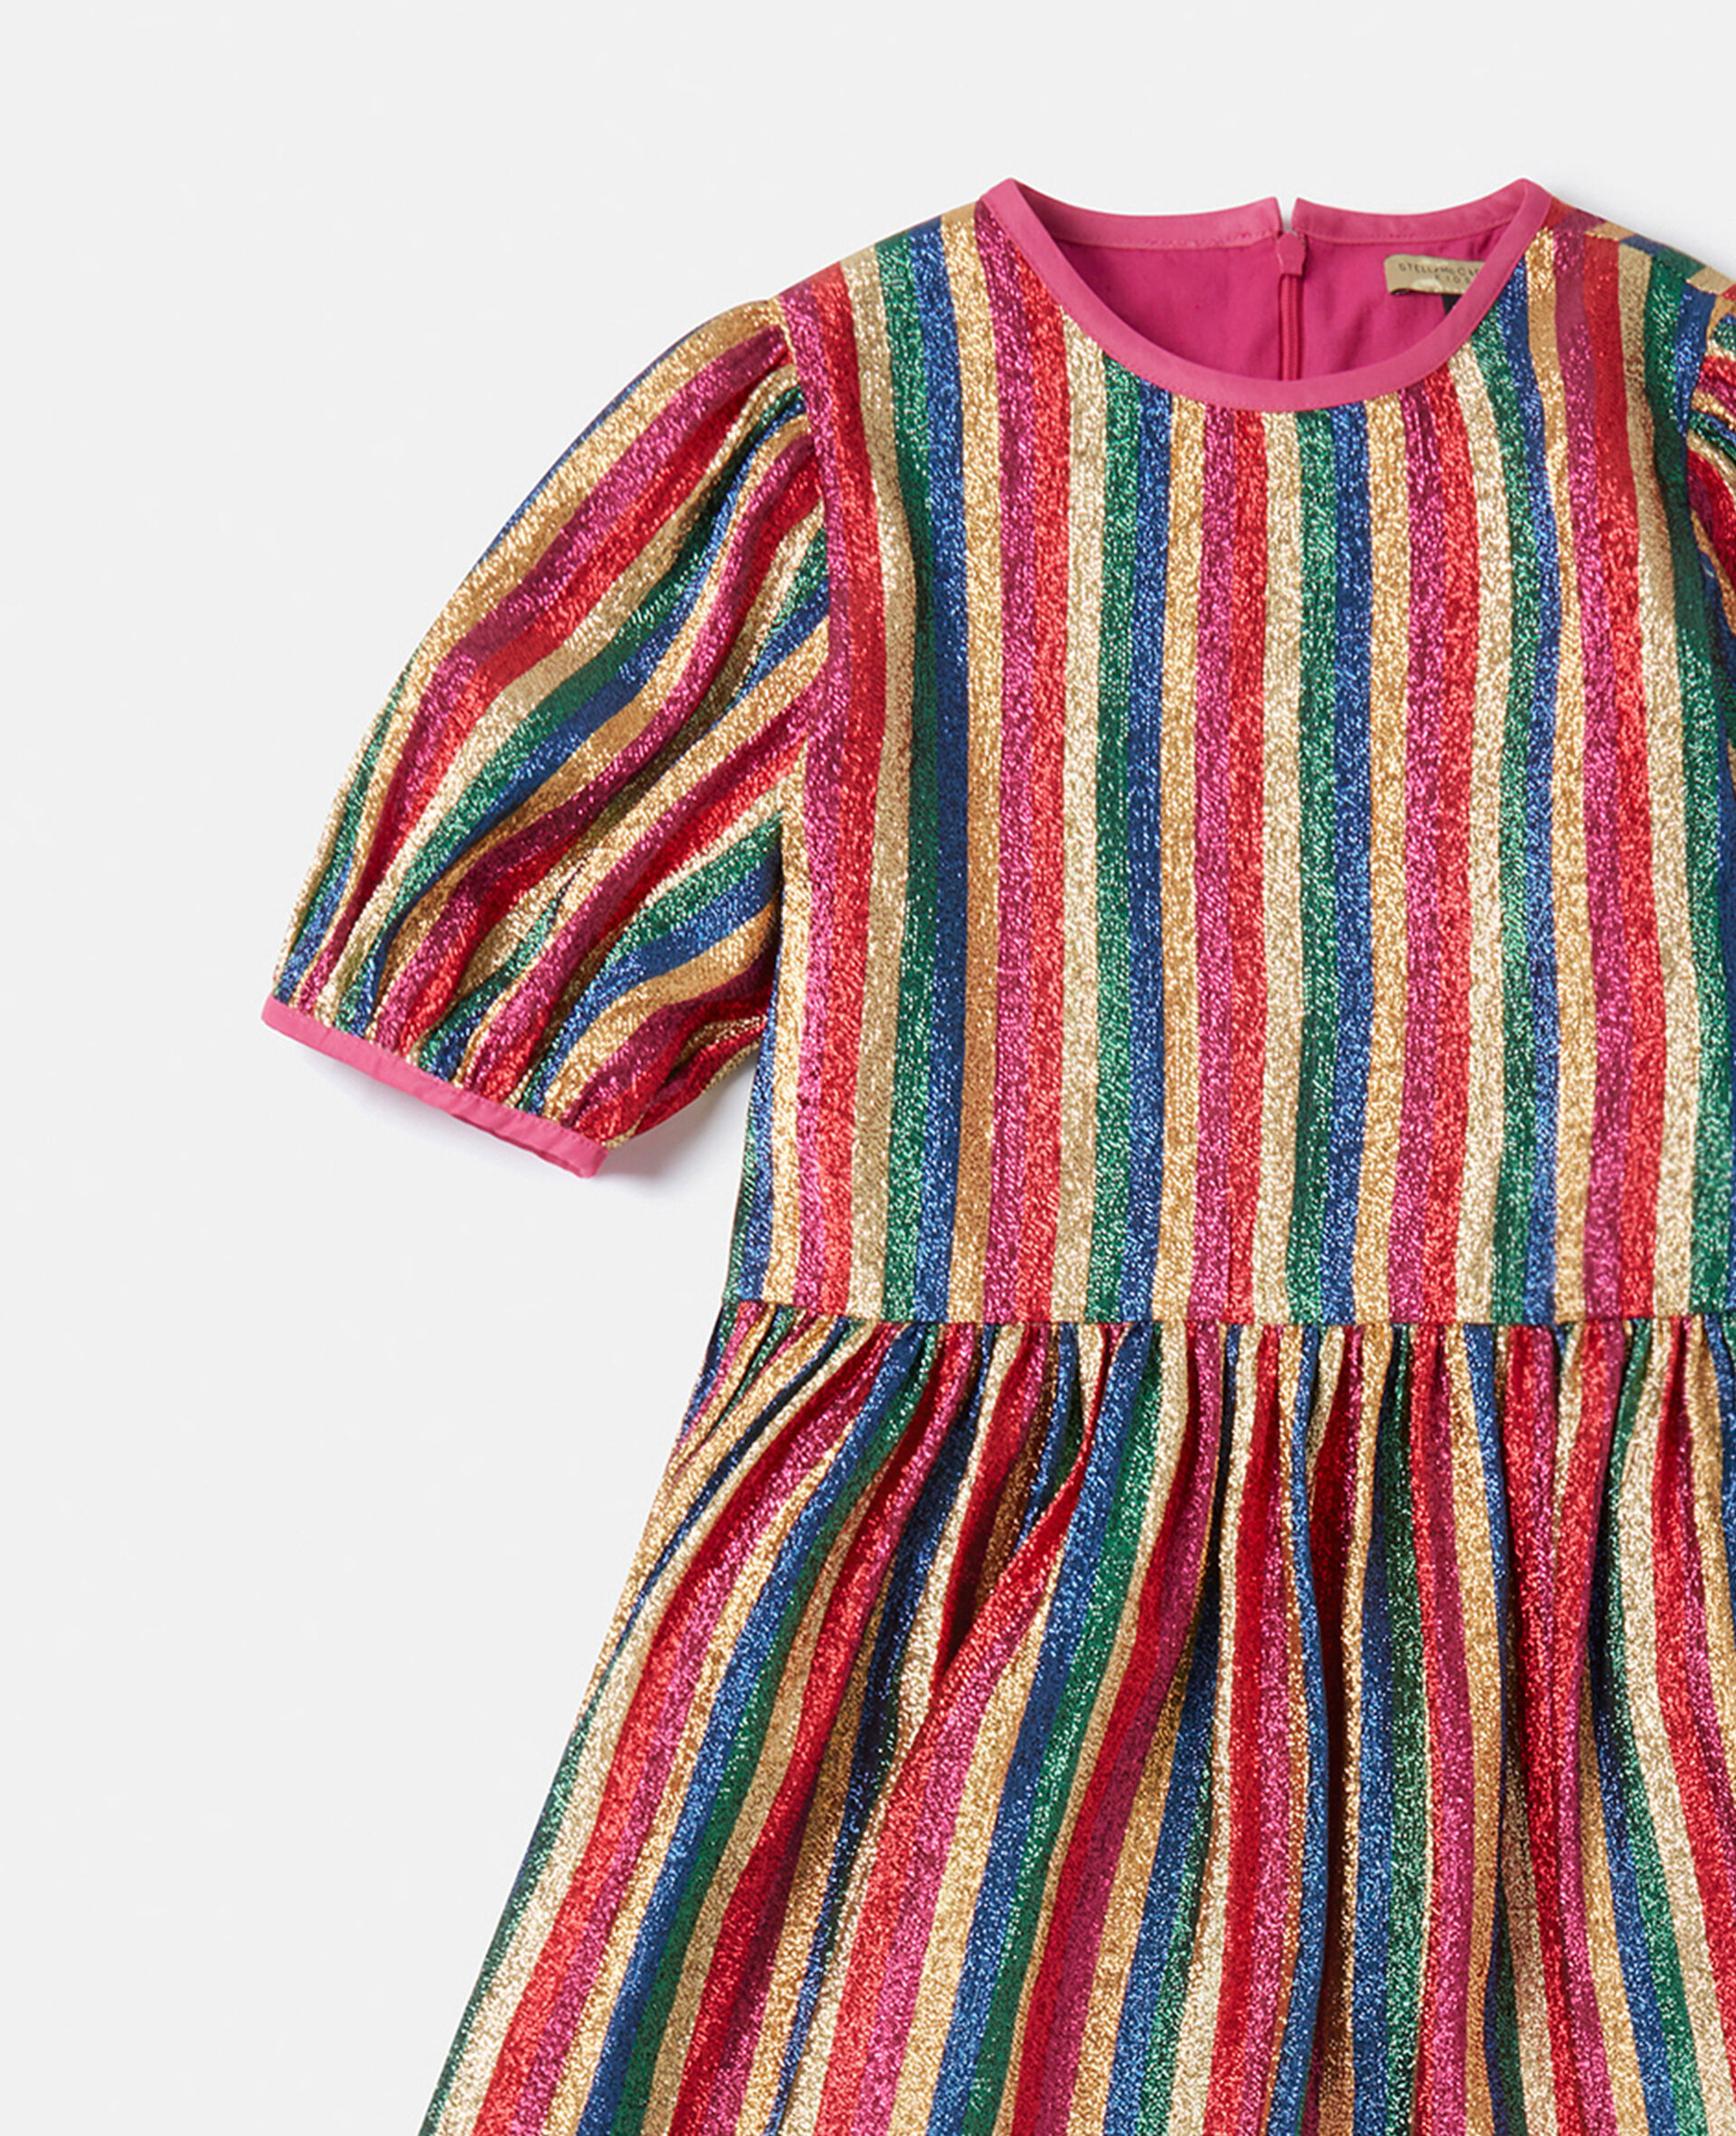 Stella McCartney Kids' Clothes for Gap - Racked NY